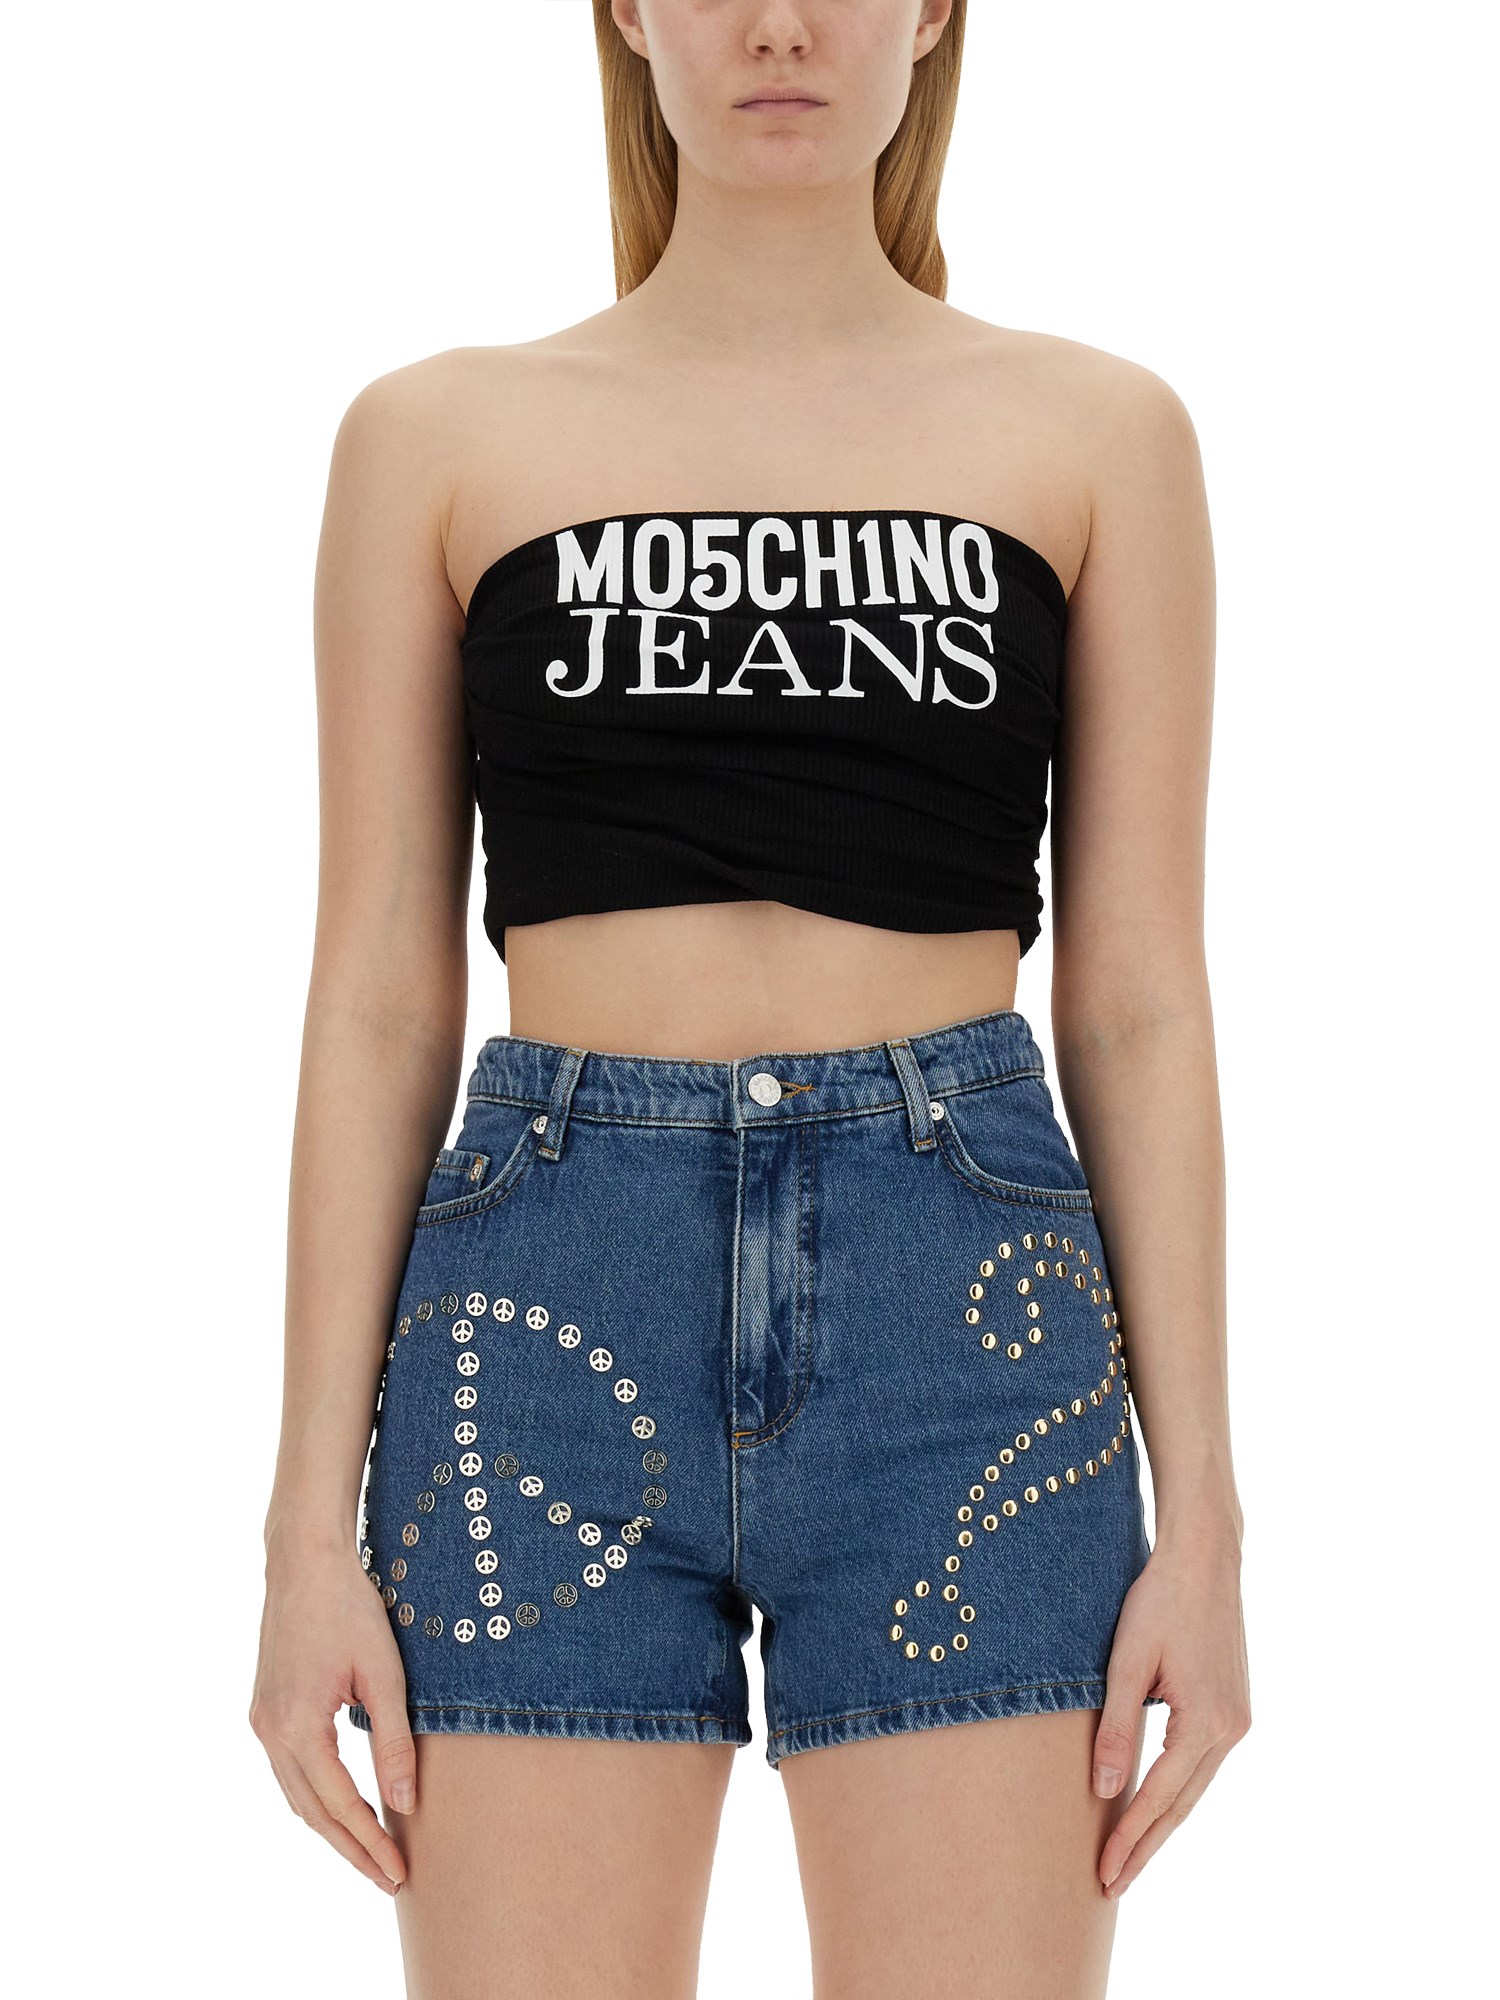 moschino jeans tops with logo